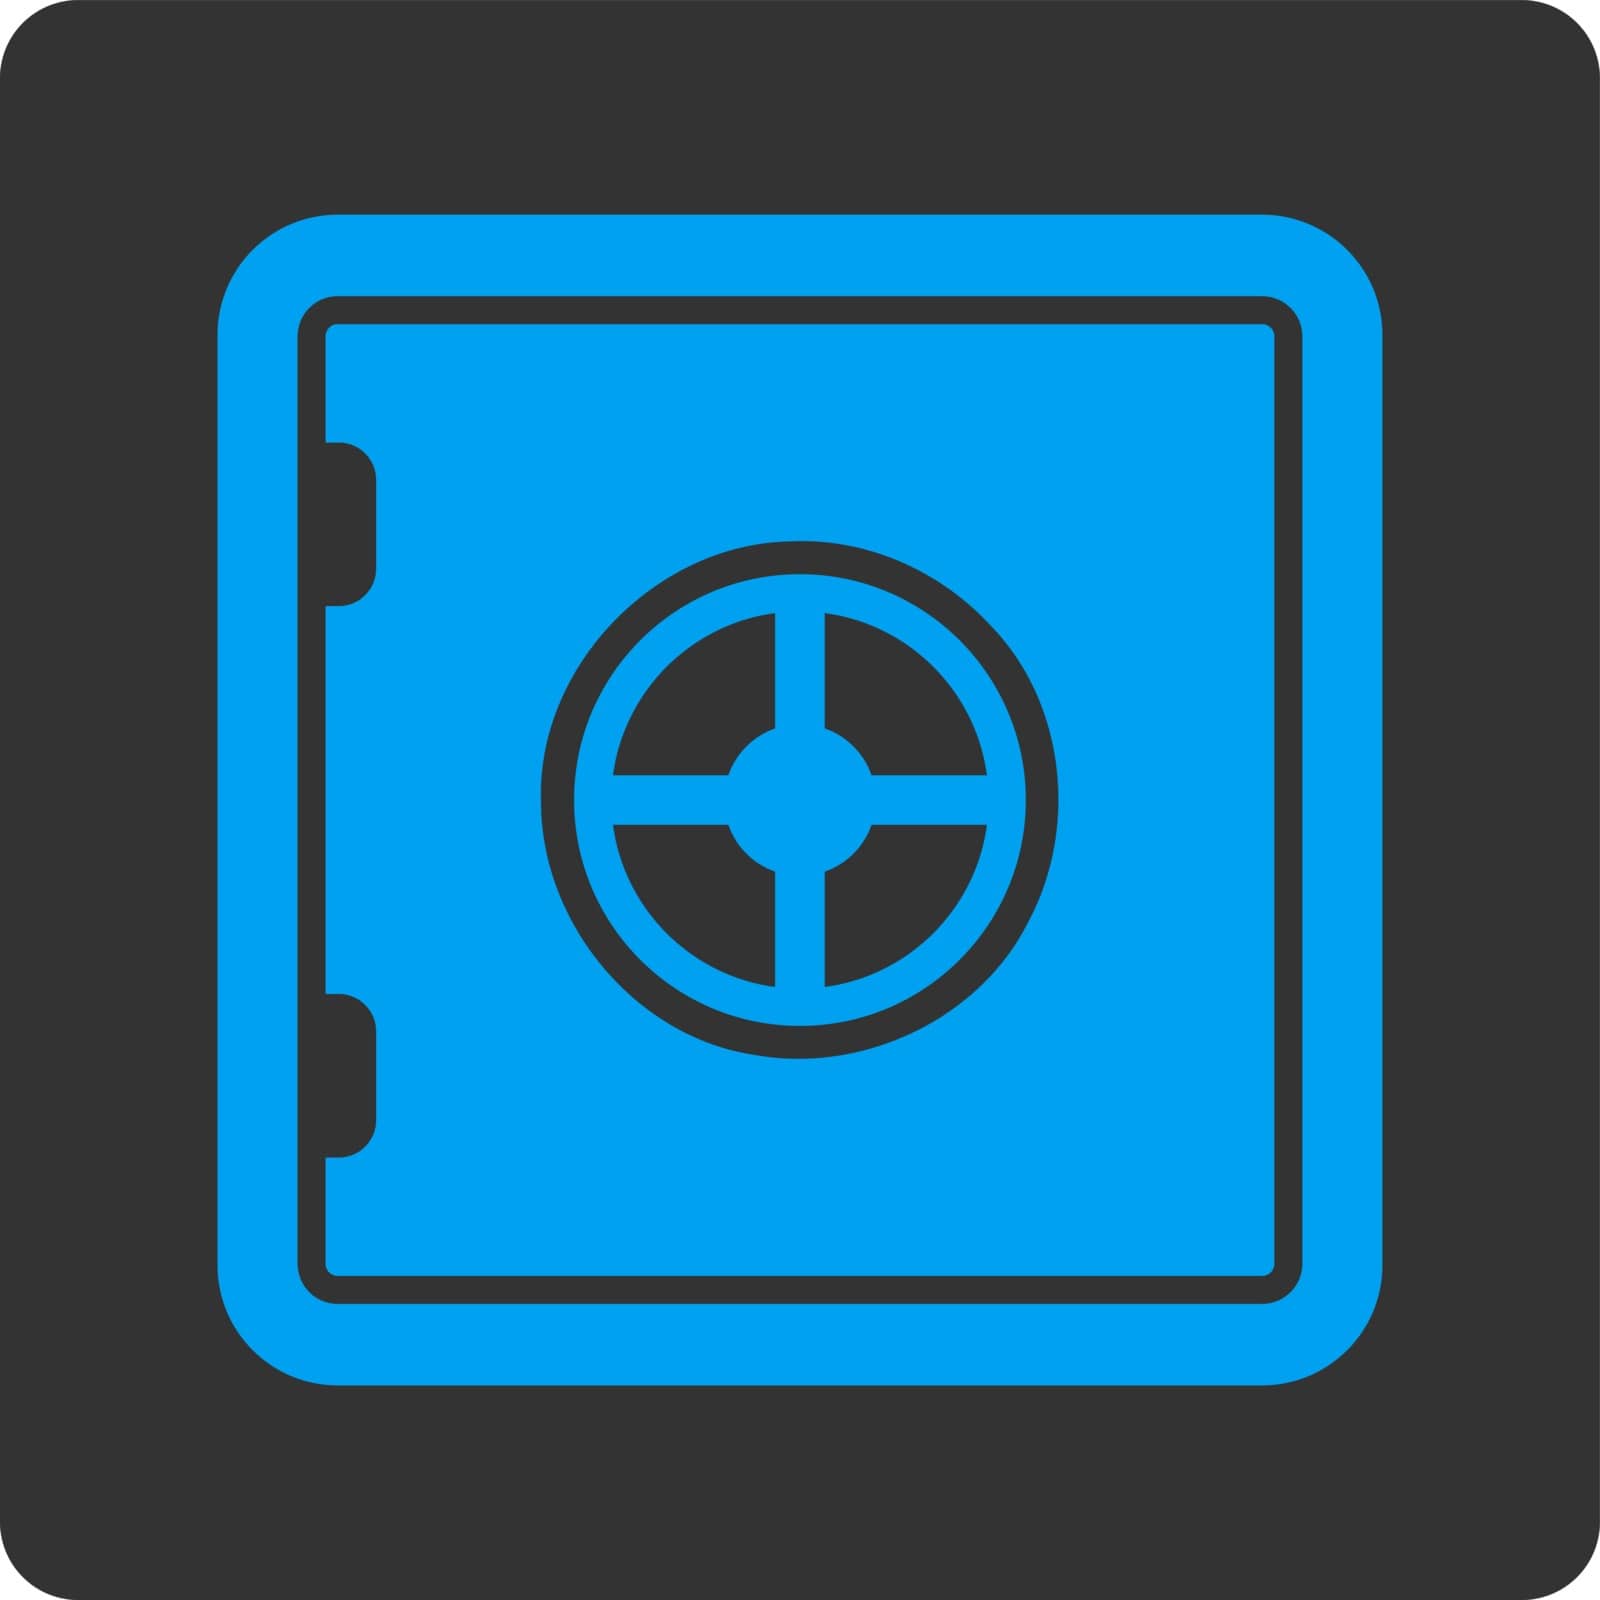 Safe icon. This flat rounded square button uses blue and gray colors and isolated on a white background.